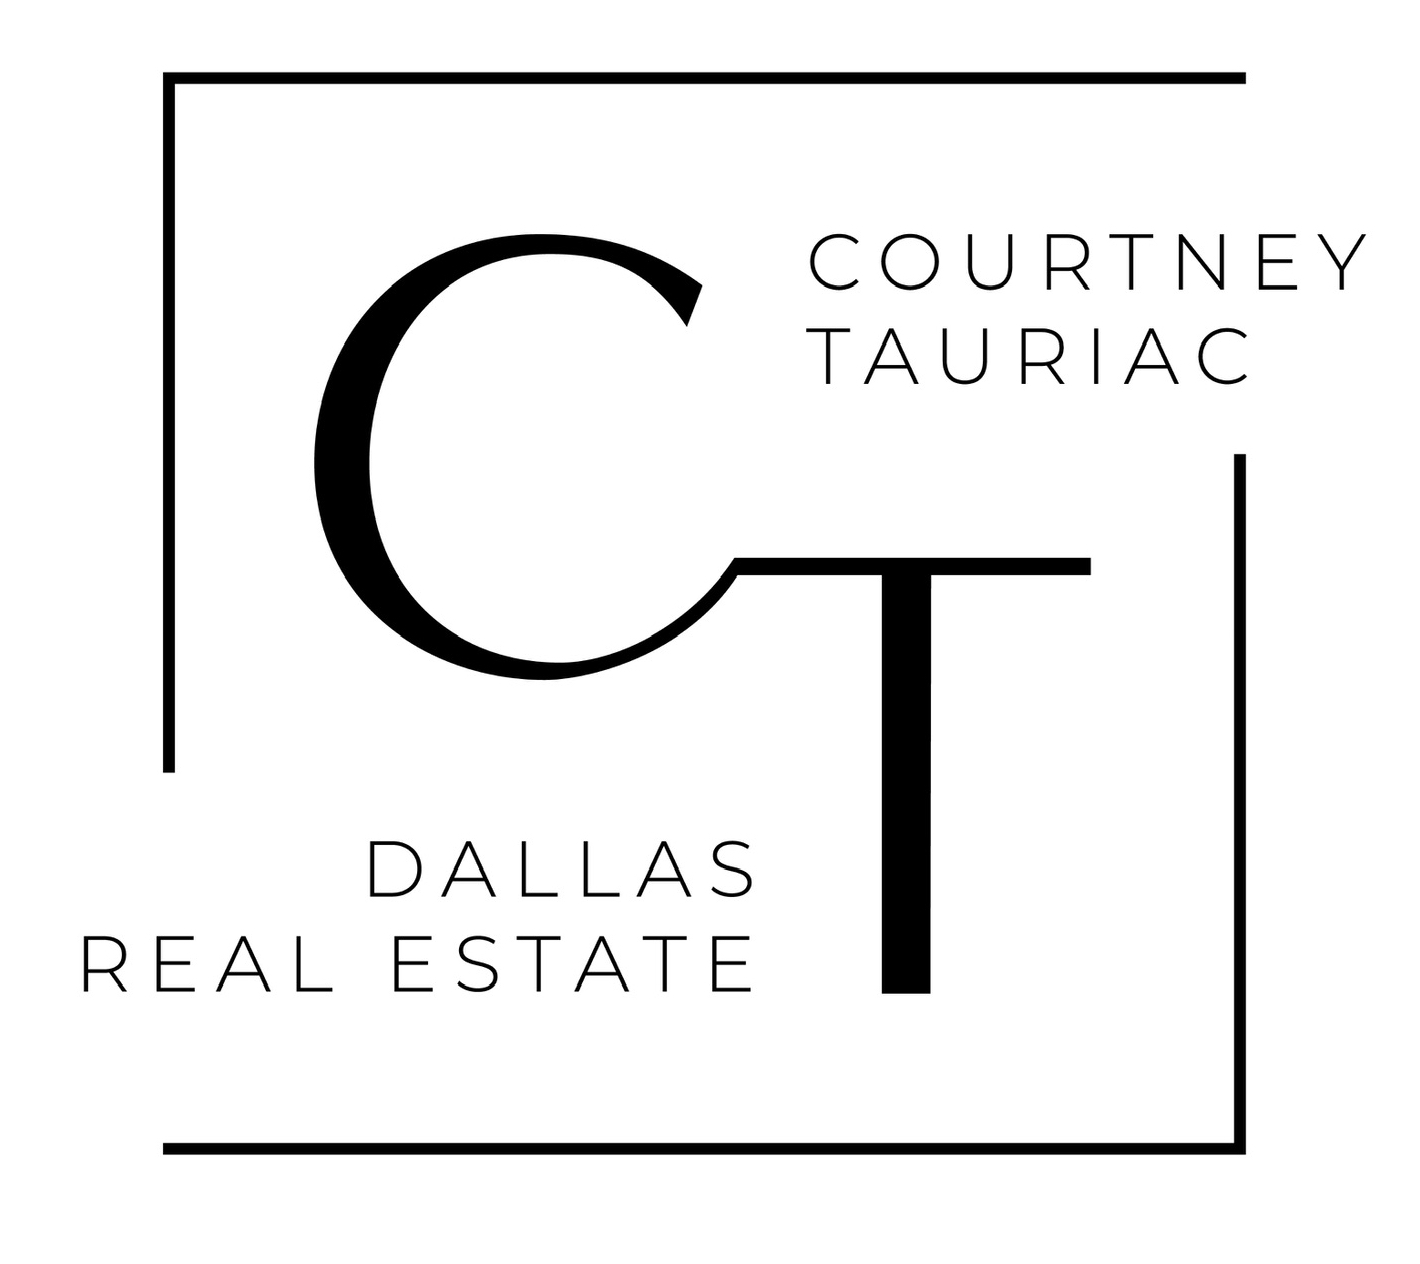 A text banner displaying the name Courtney